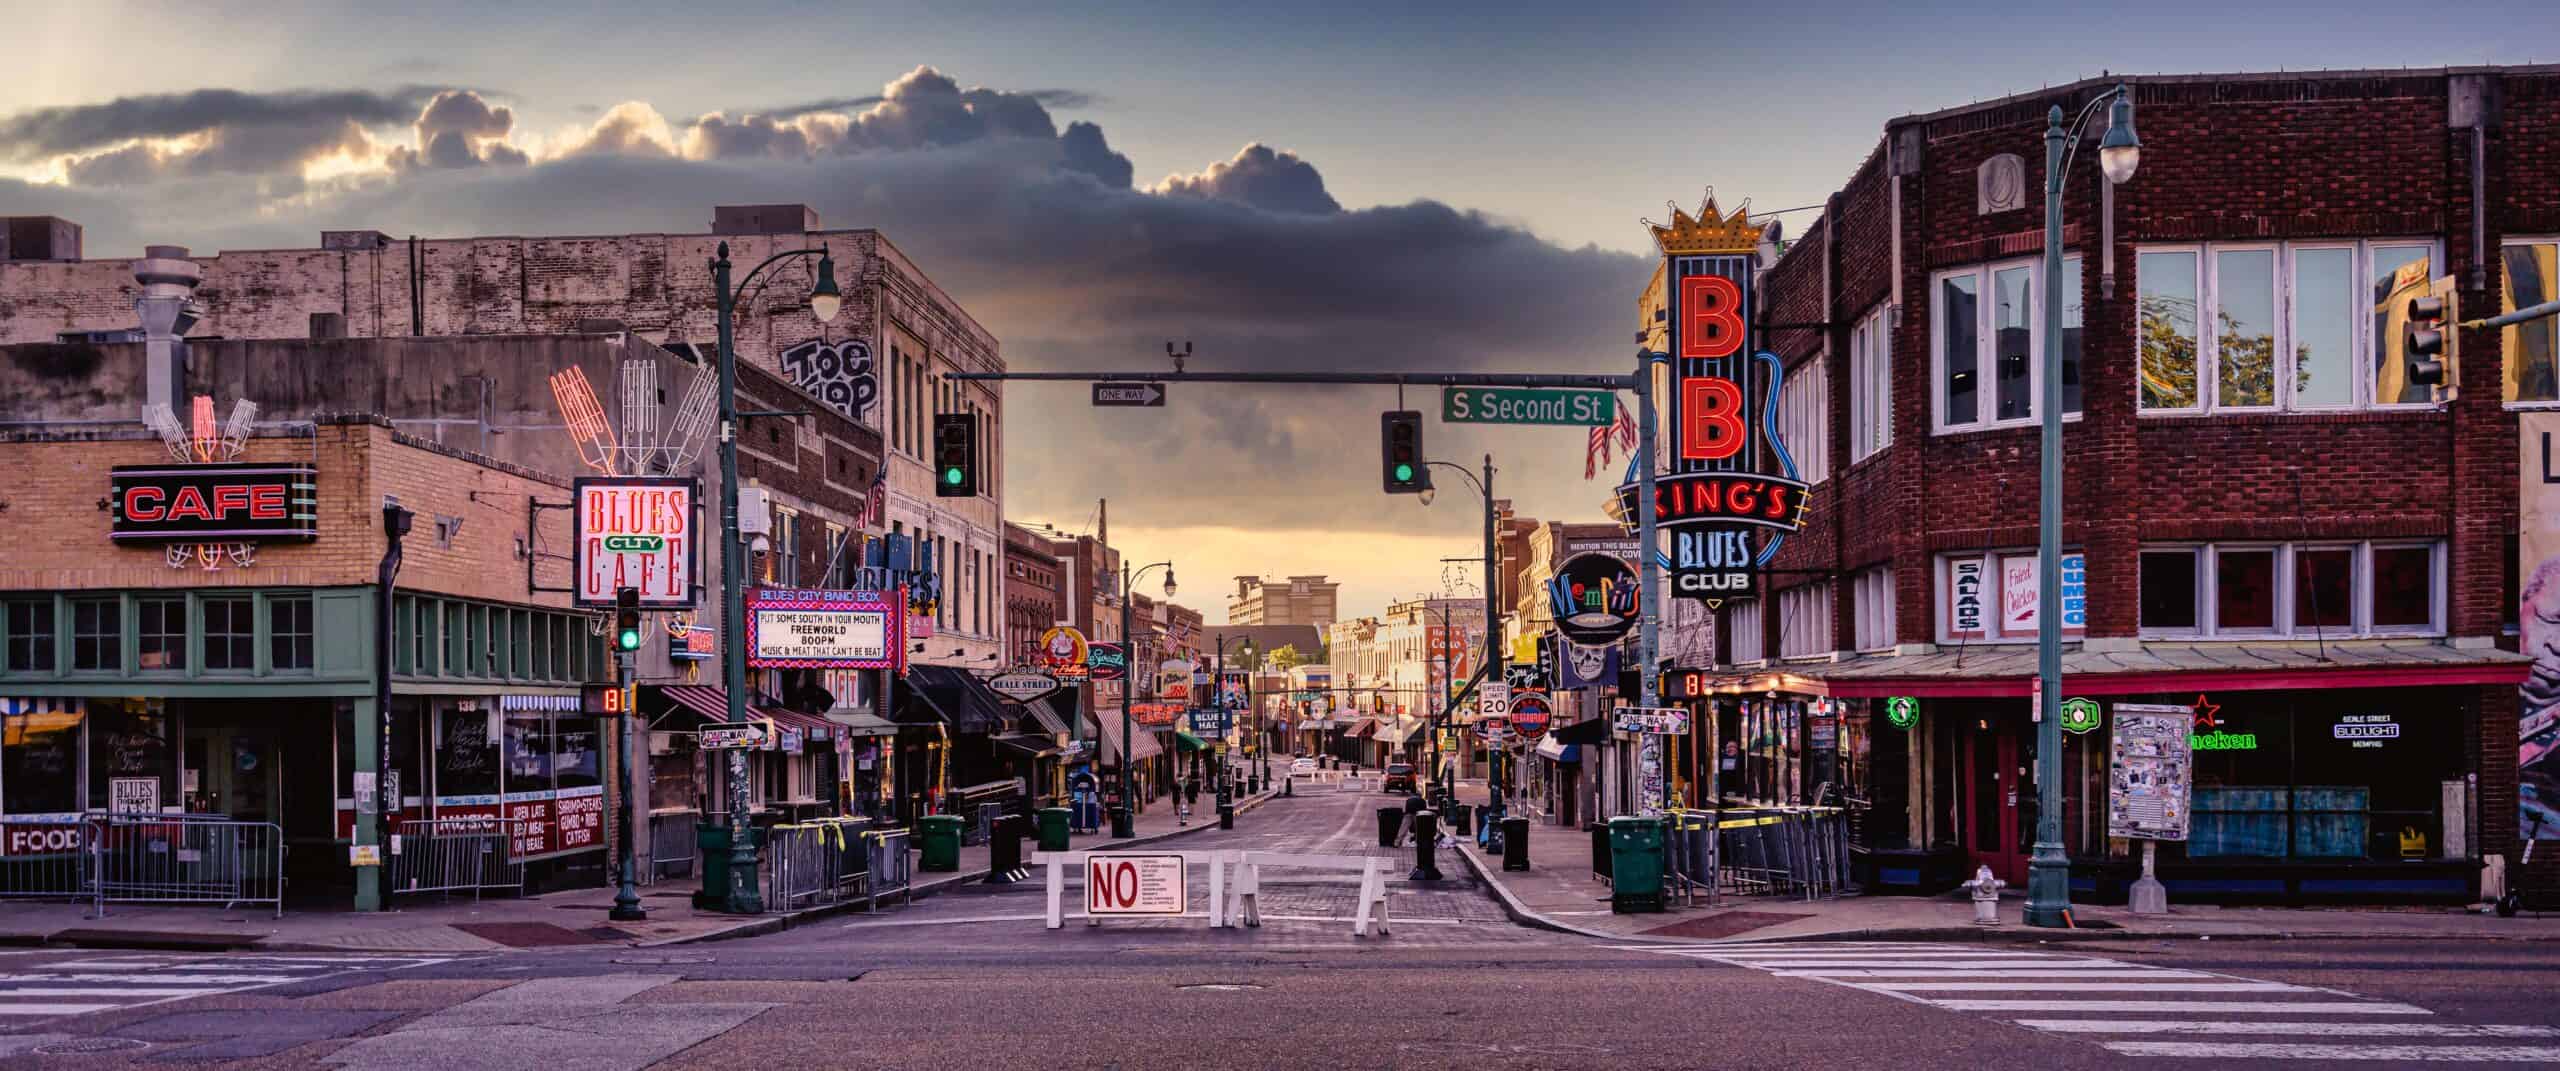 Beale Street Memphis Morning by Mobilus In Mobili